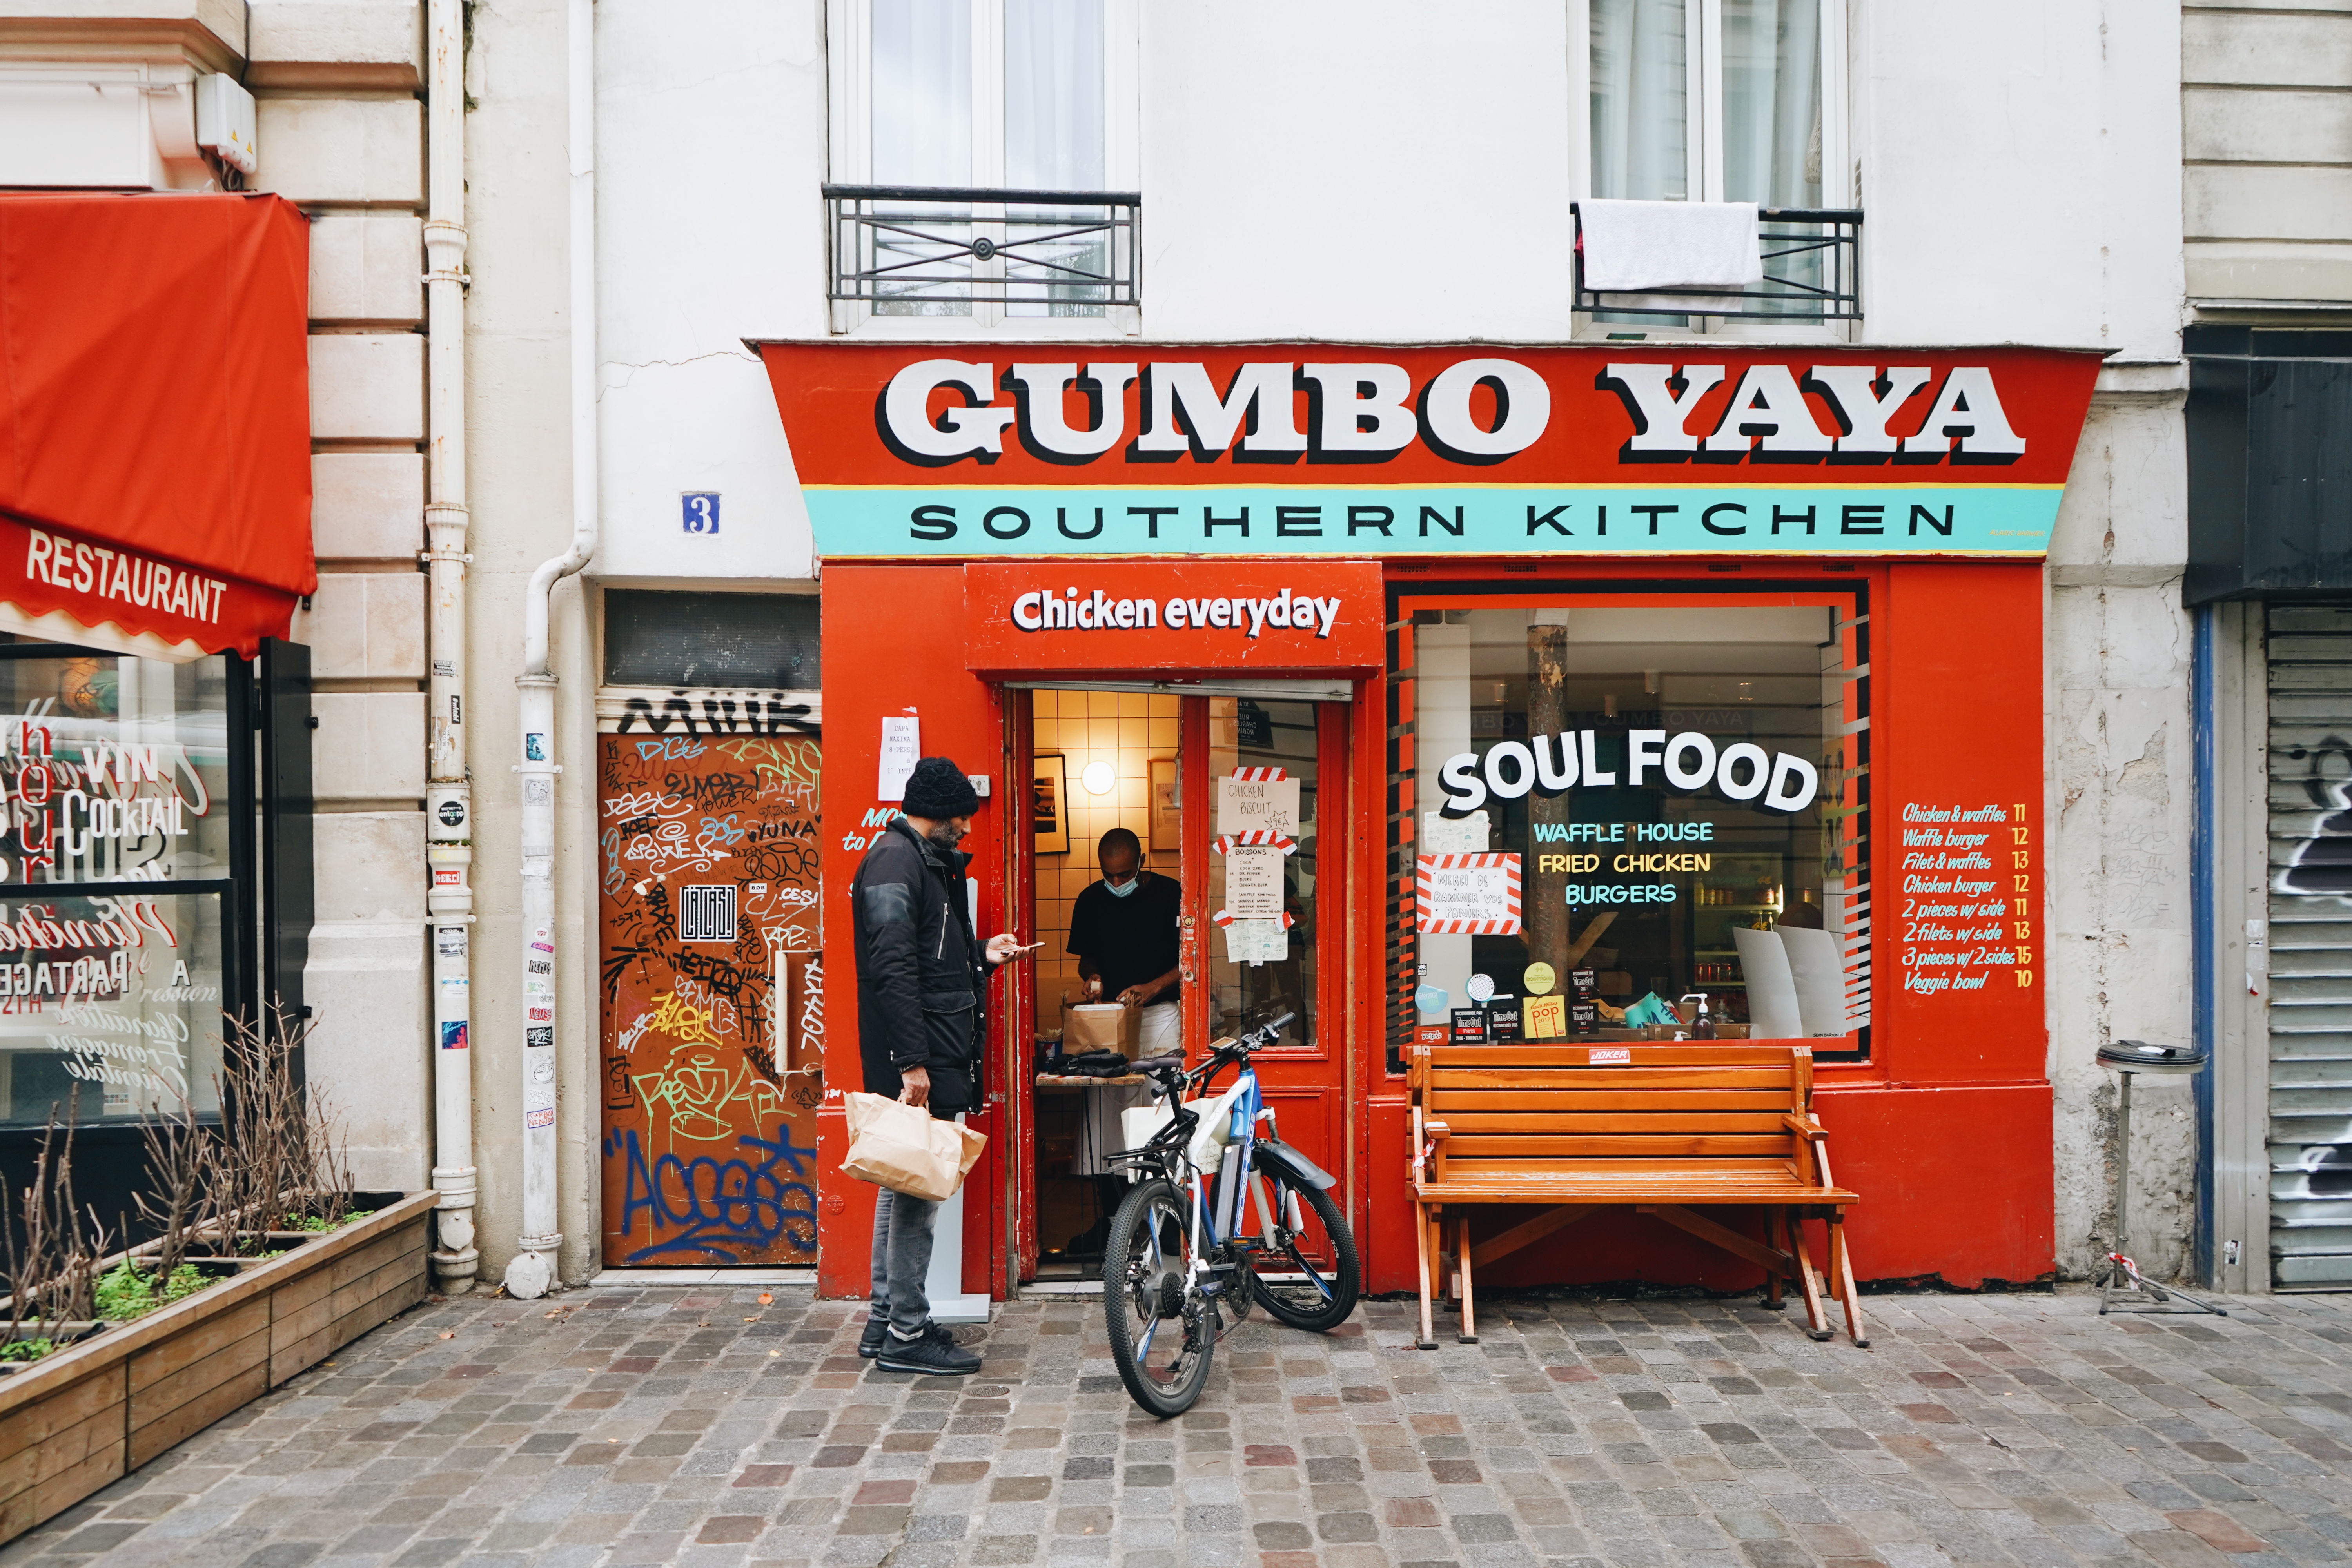 A man stands next to a bicycle in the brick plaza outside of Gumbo Yaya as another man inside the doorway packs up some food. The restaurant’s bright-red facade says “Gumbo Yaya Southern Kitchen” and its front window reads “Soul Food.”